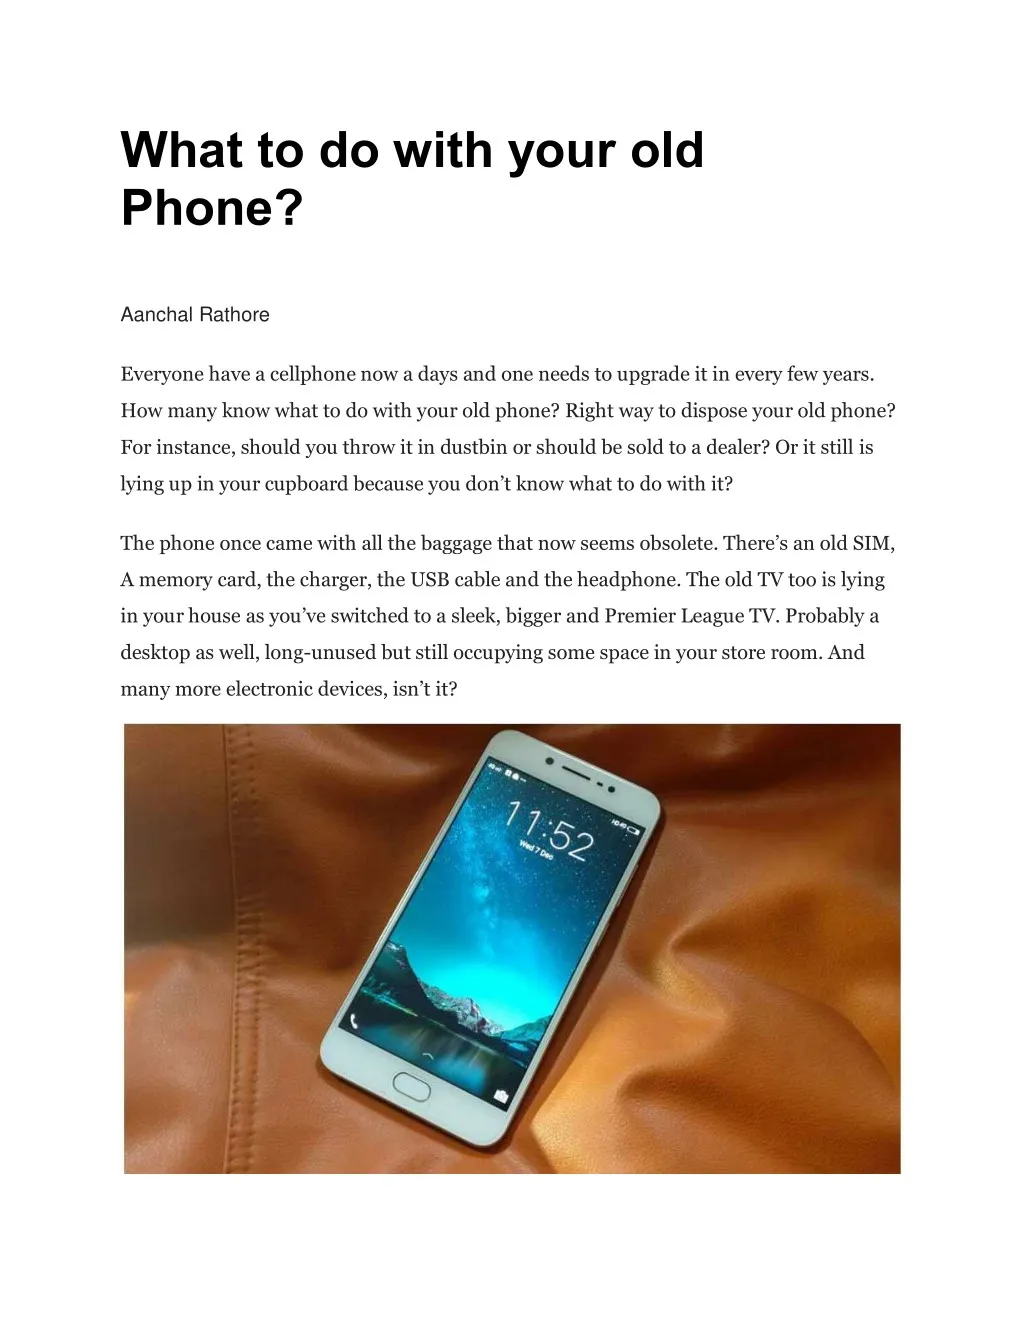 what to do with your old phone